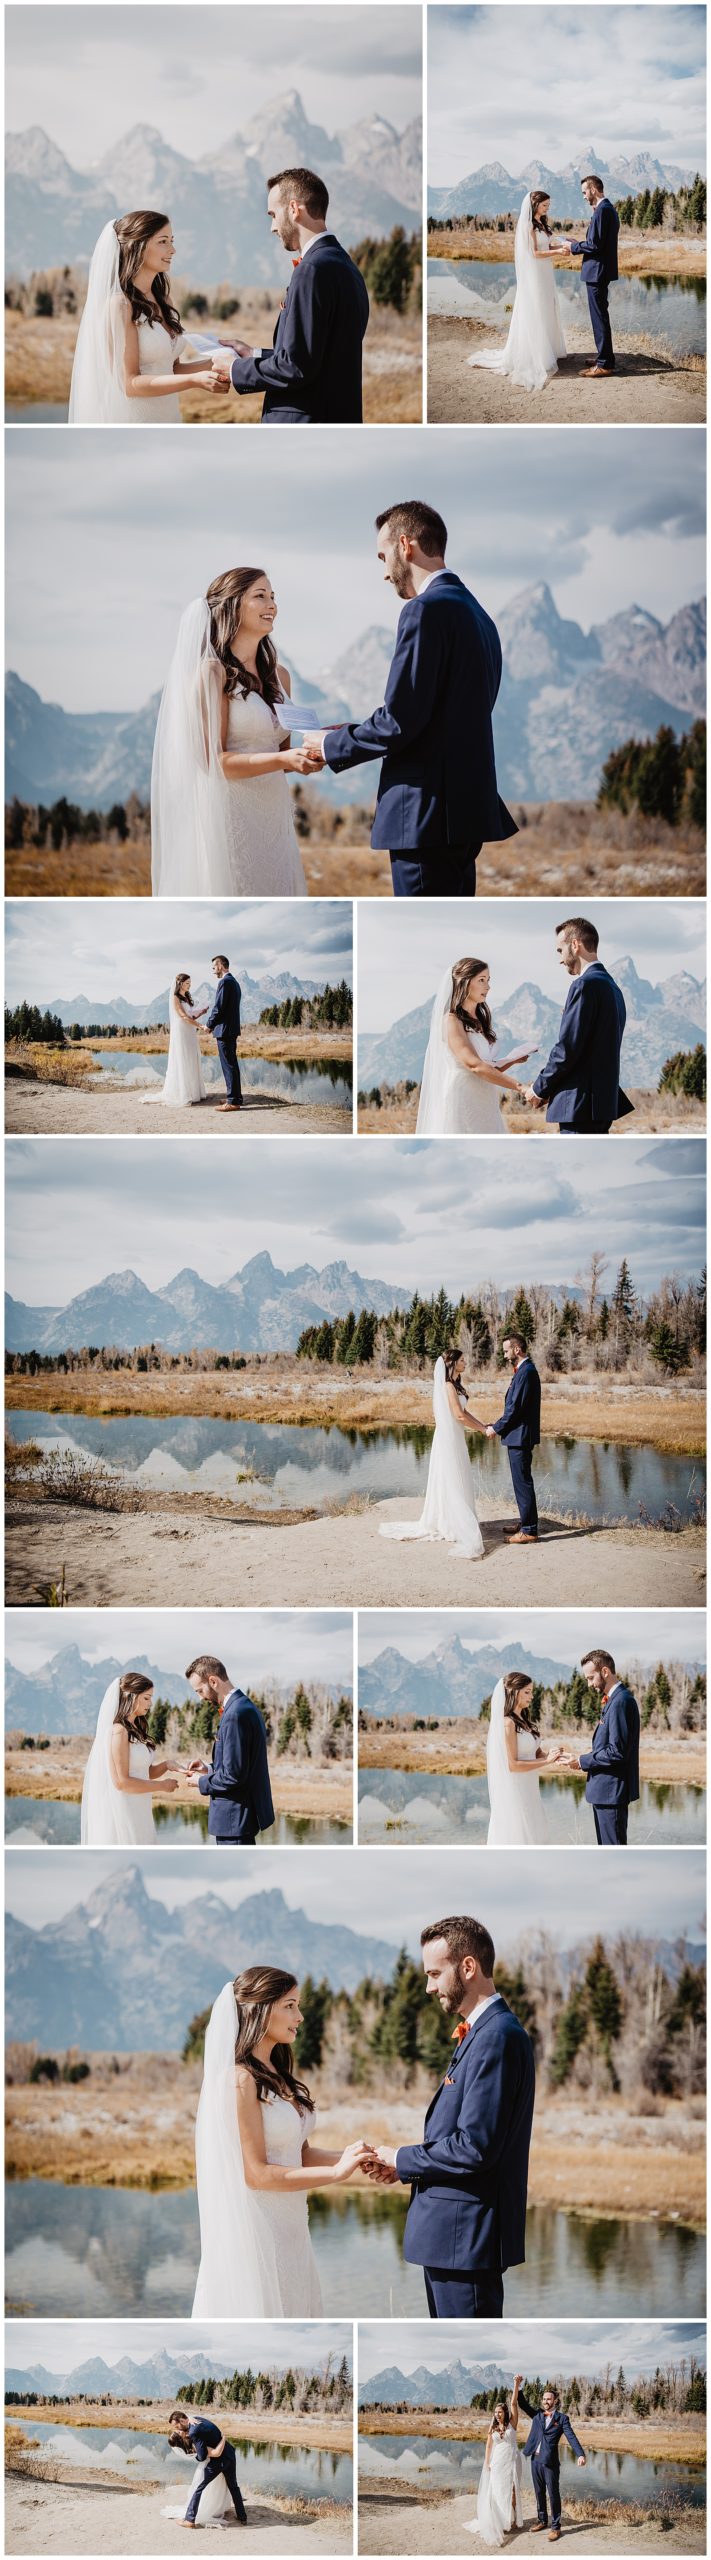 Grand Teton fall wedding ceremony in front of the Tetons mountain range, the bride and groom hold hands and share their vows